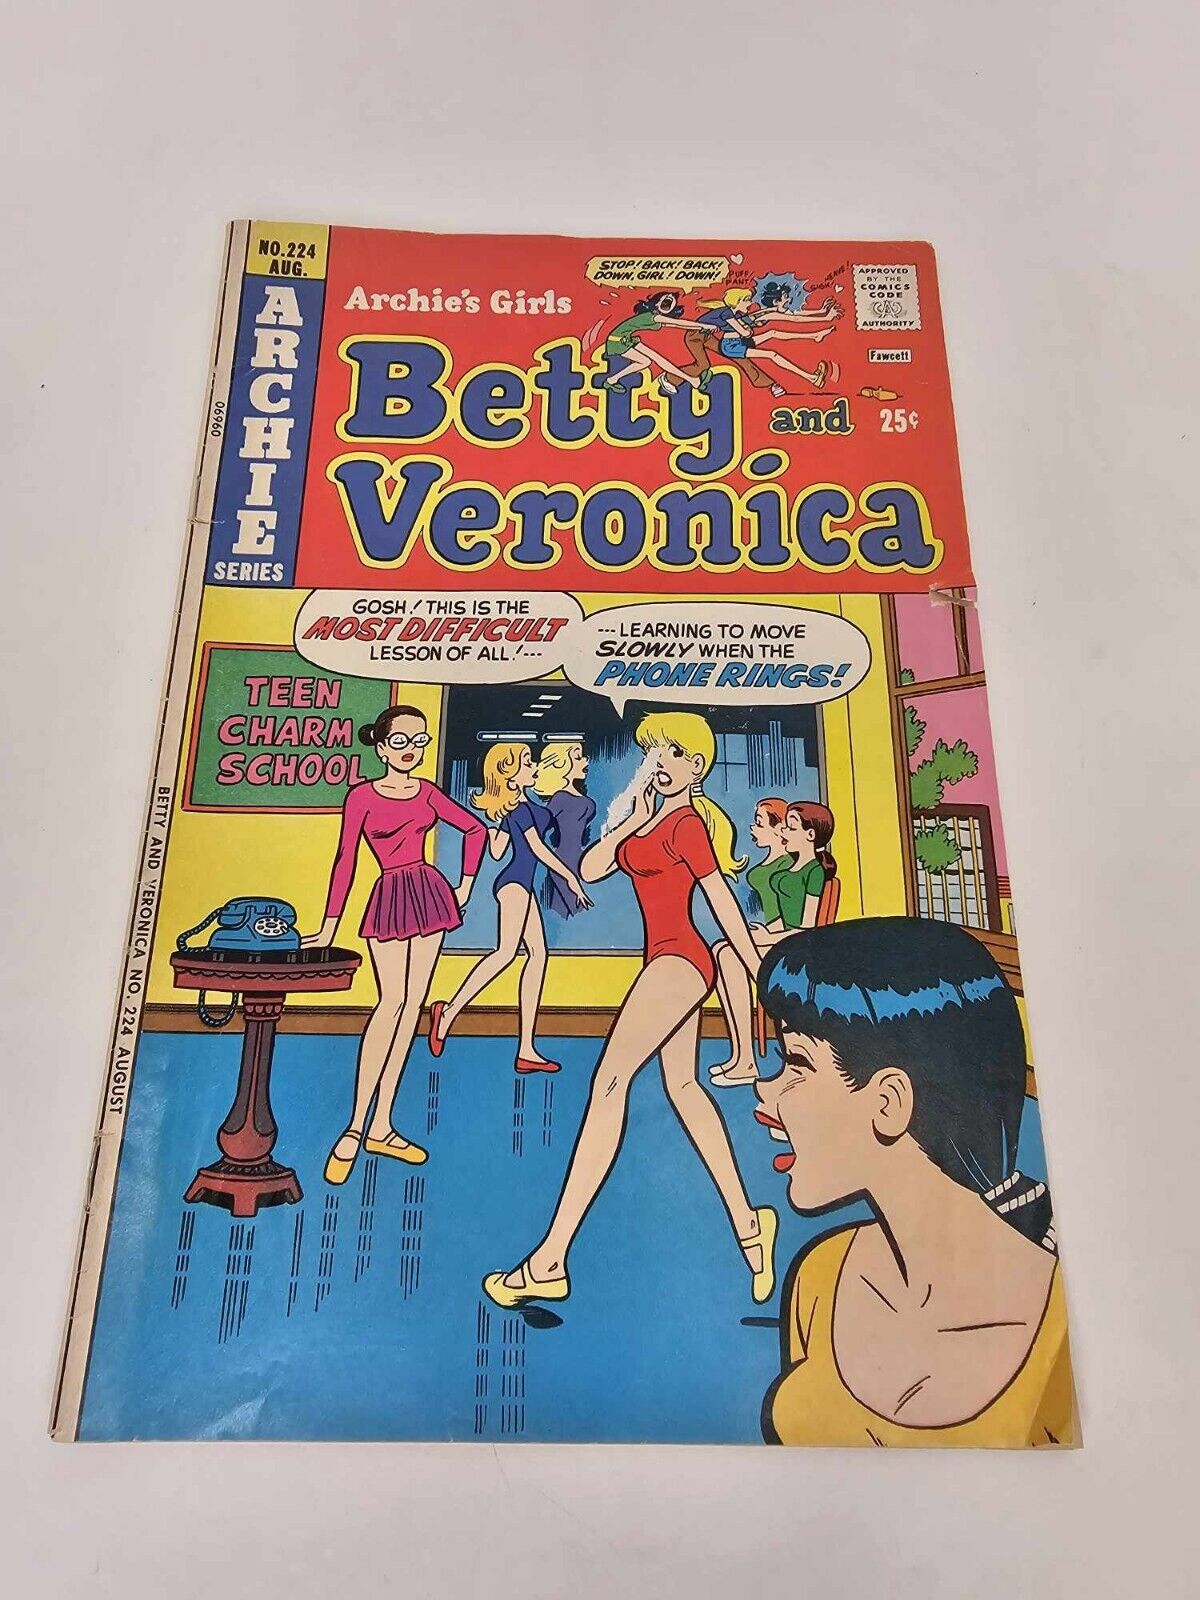 Archie Series Archie's Girls Betty and Veronica  Aug 1974 # 224  